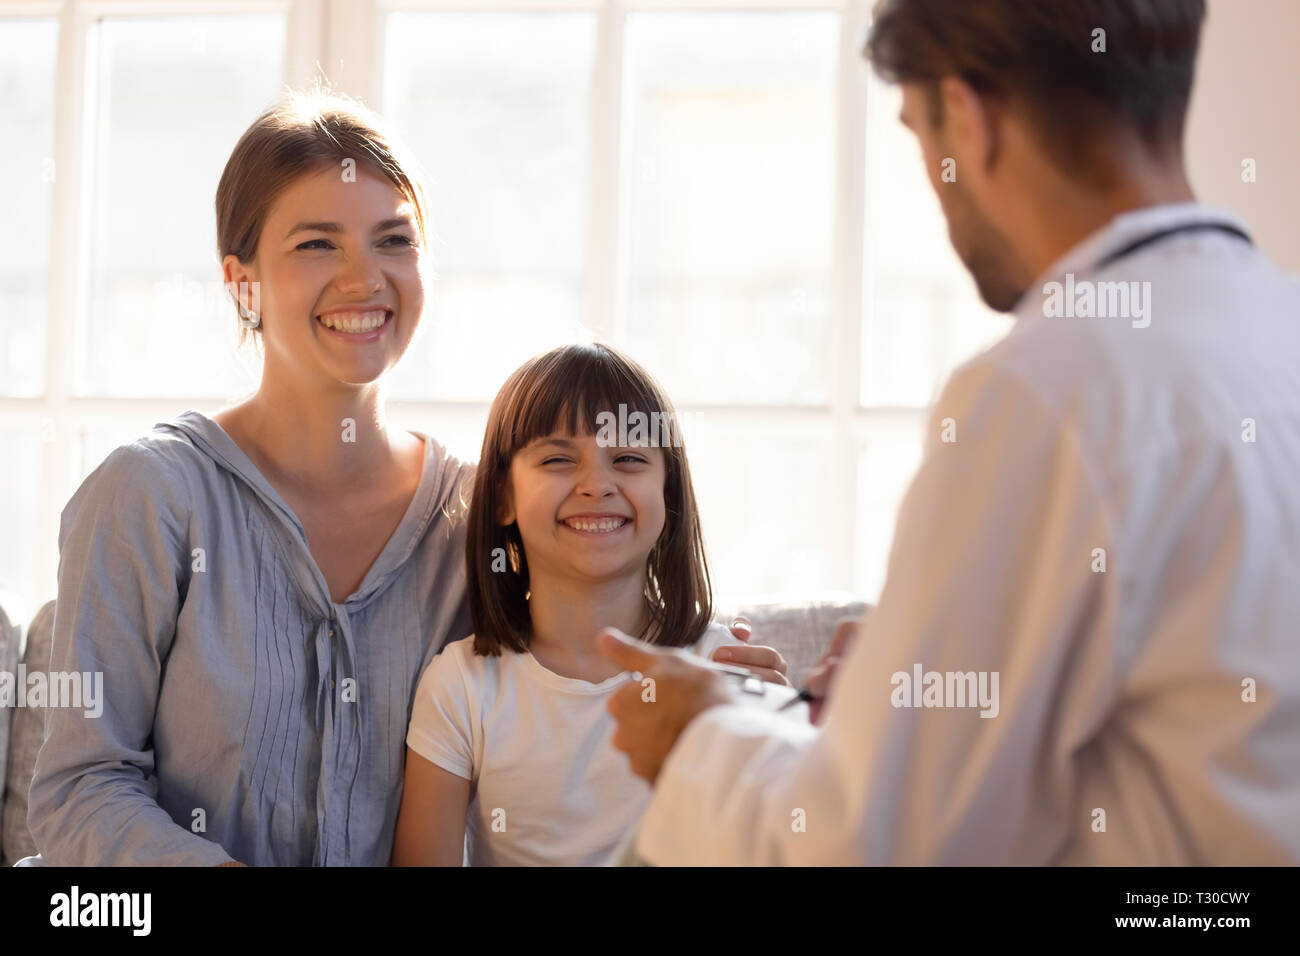 Paediatrician male doctor writing patient information focus on little girl Stock Photo